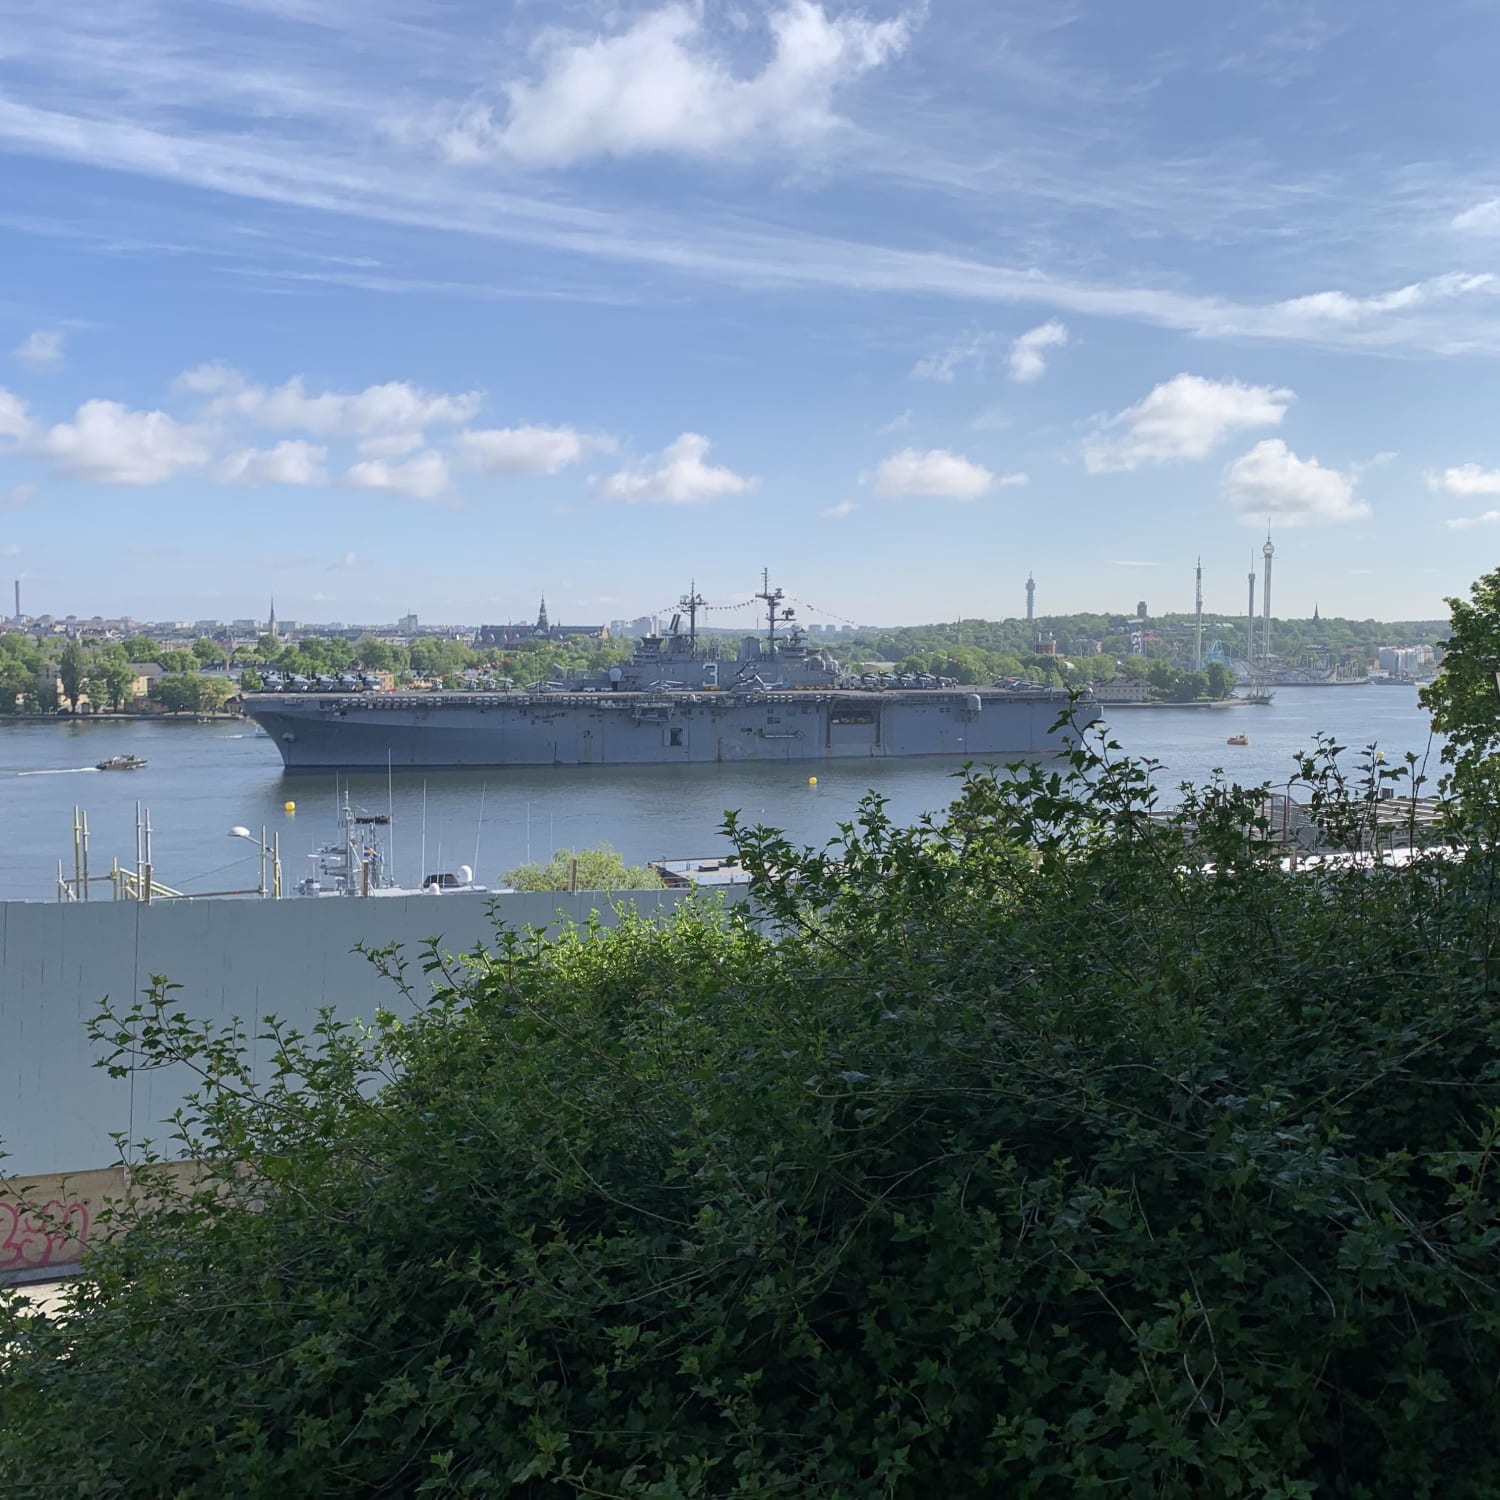 The massive military boat that pulled up to Stockholm a few months ago